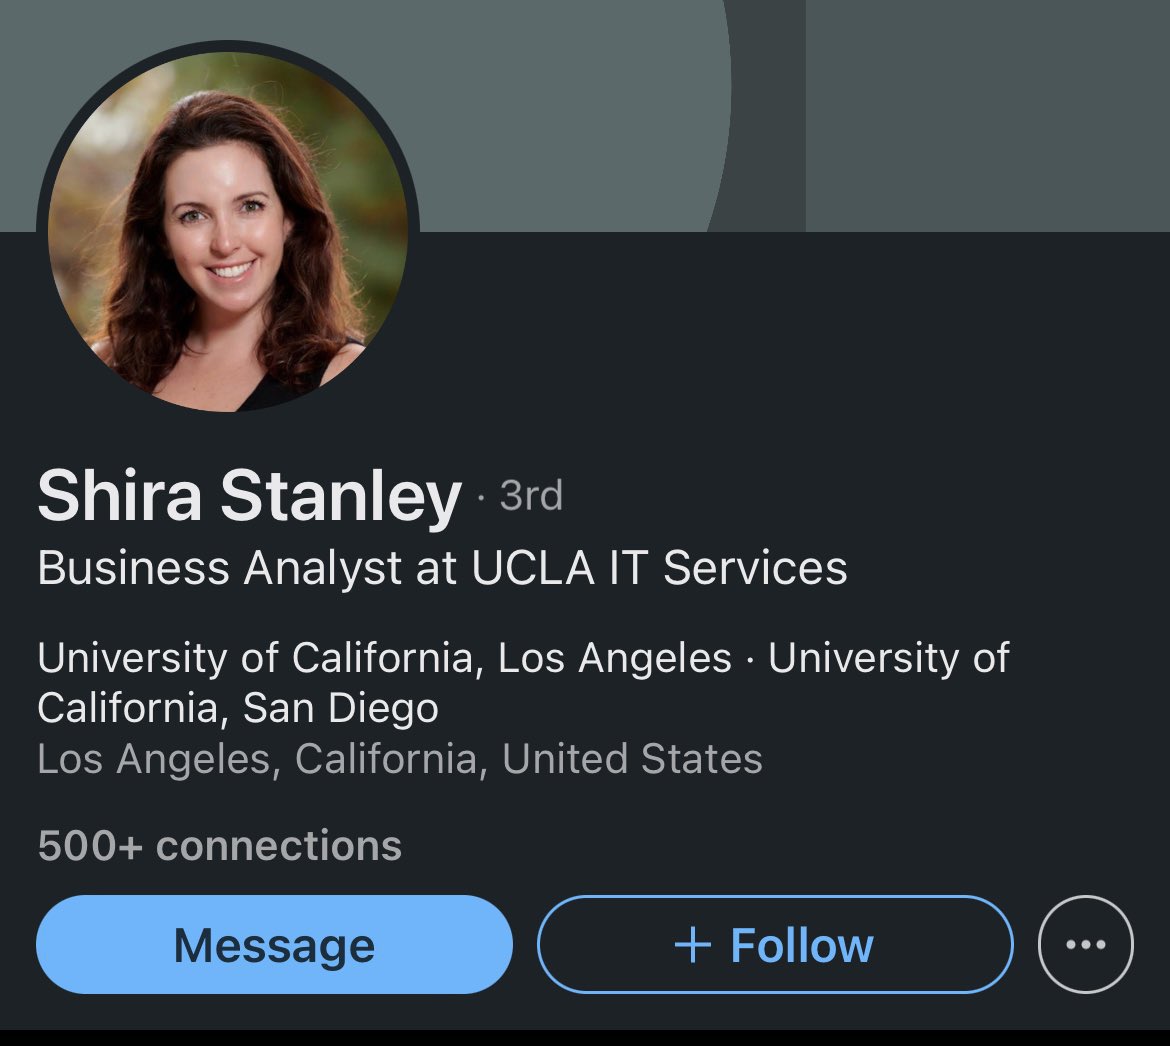 “Tell me again why we shouldn’t obliterate Gaza and the West Bank? What is there to save there?”

Shira Stanley is a business analyst at @UCLA IT Services… and an advocate of ethnic cleansing.

To express your concerns:

Office of the Chancellor:
📧 chancellor@ucla.edu

Deputy